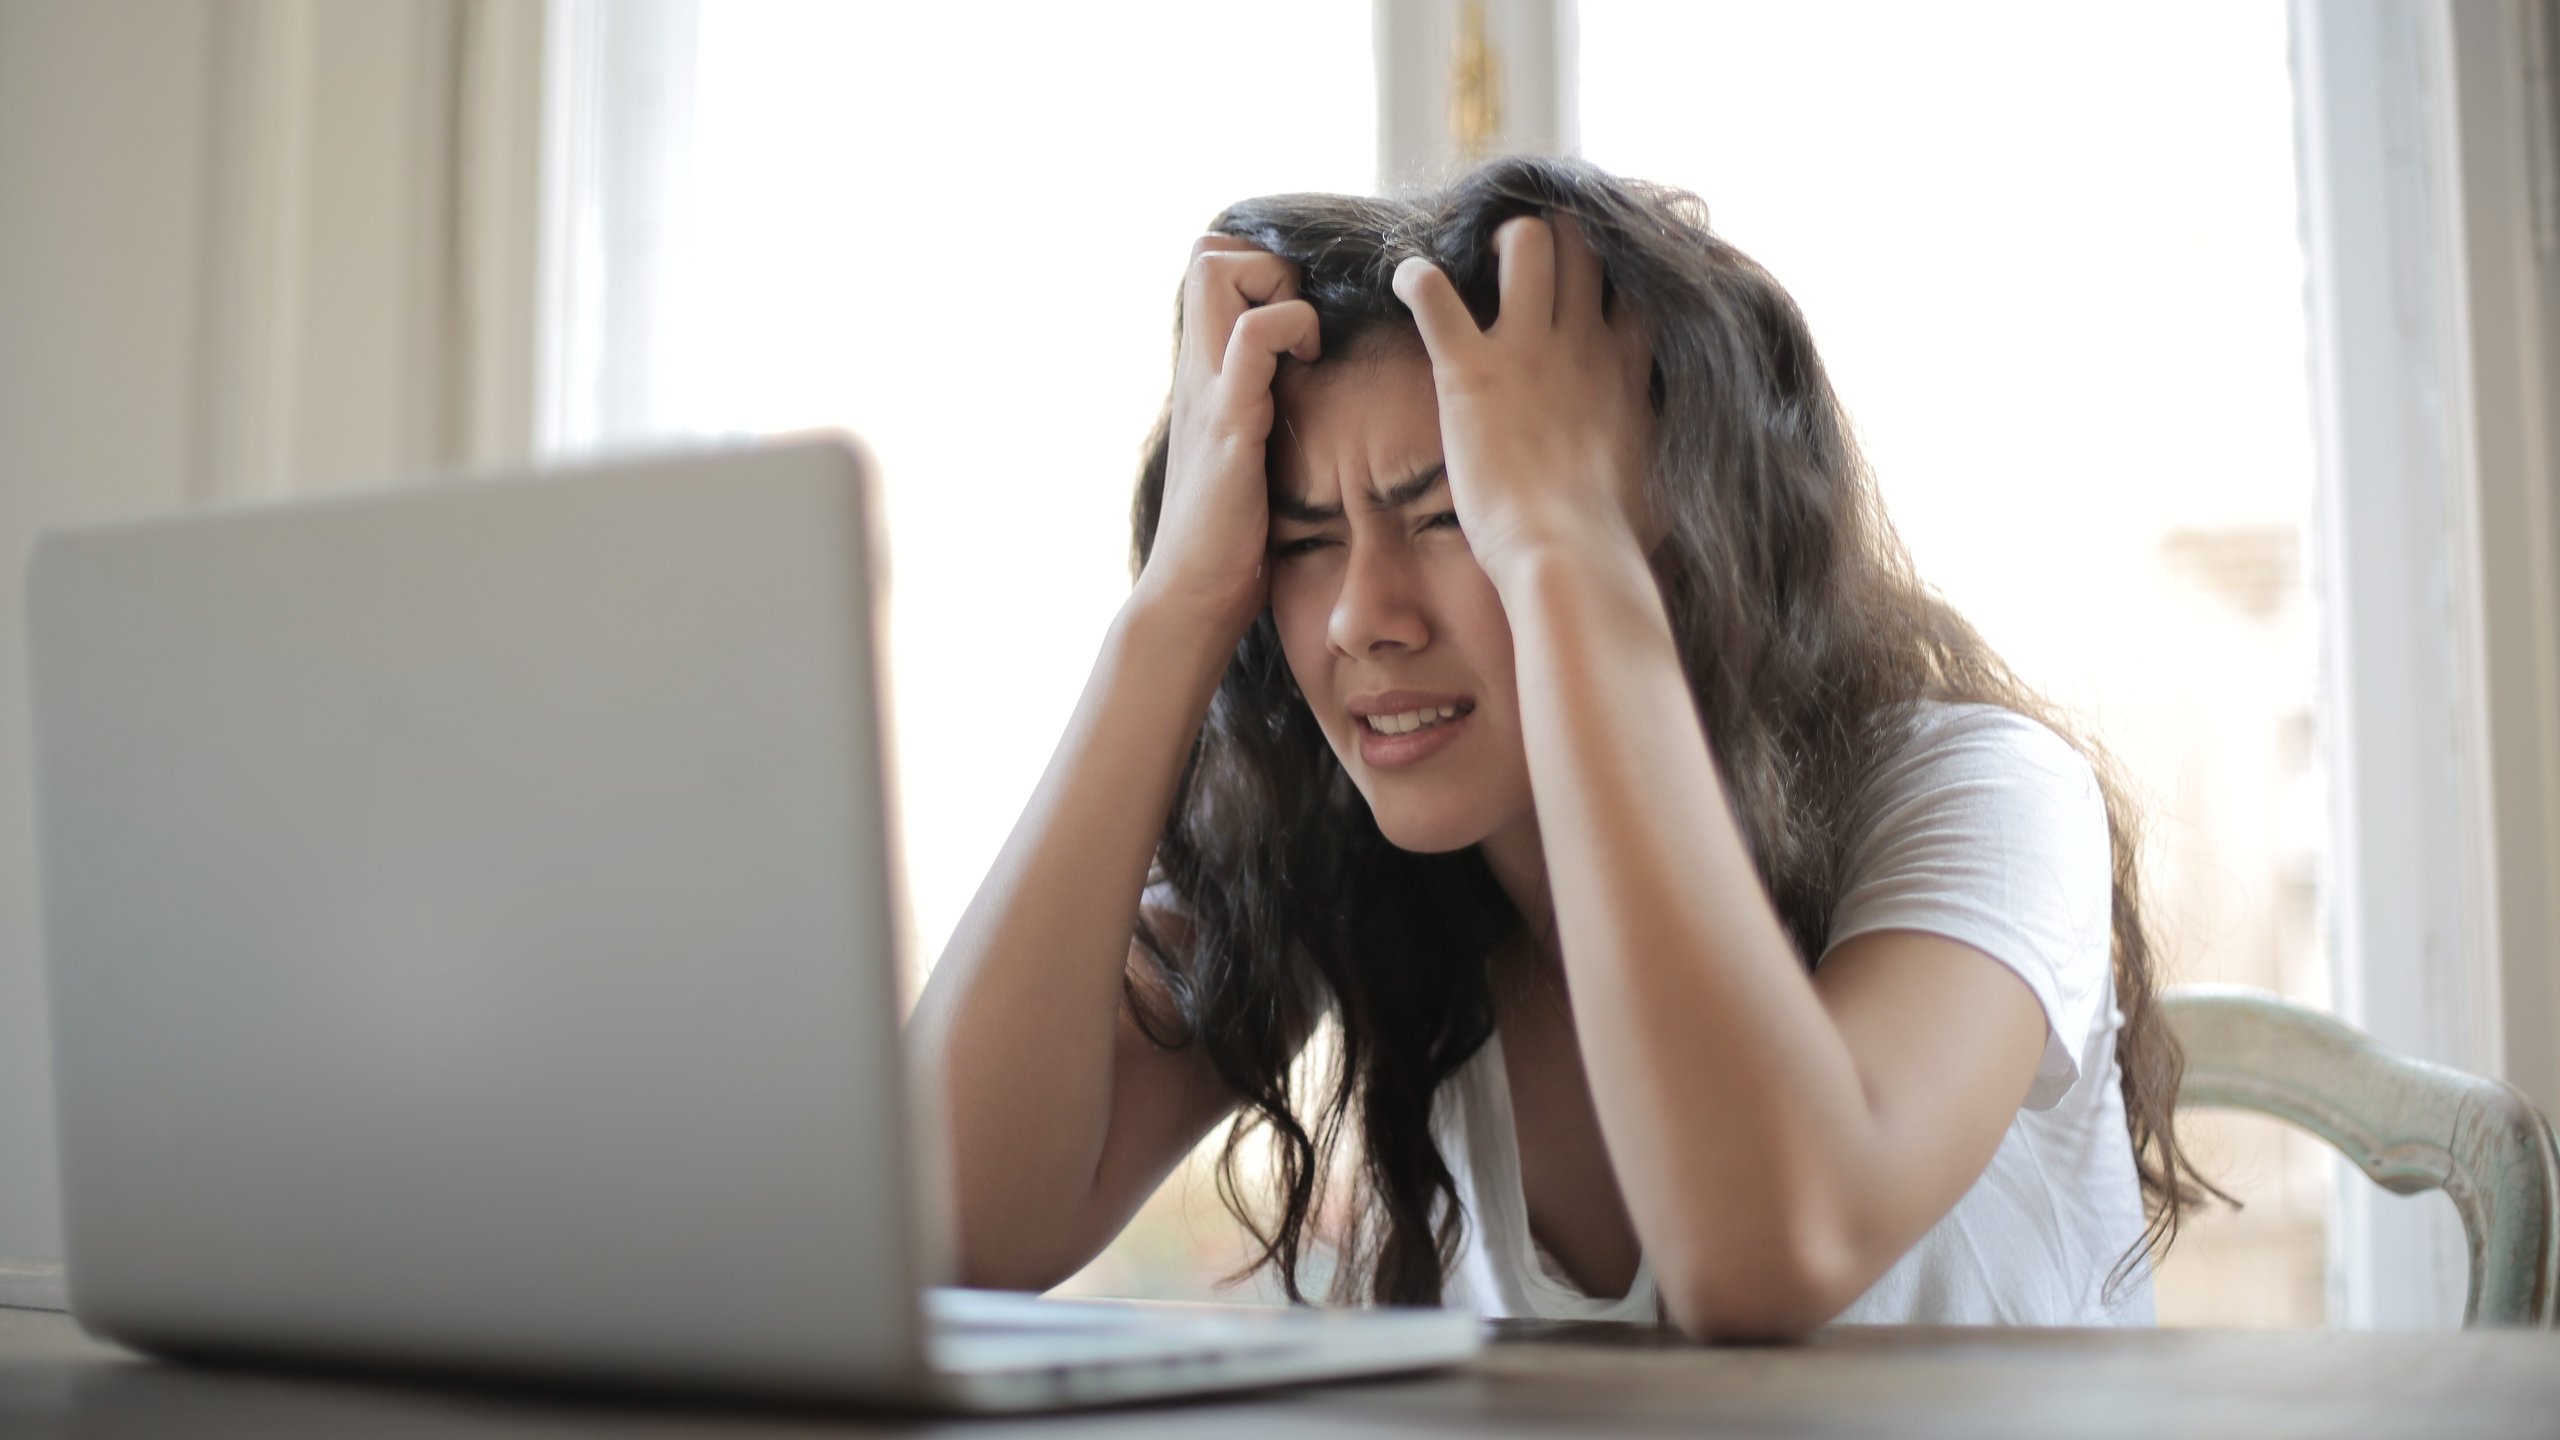 A woman is holding her head in front of her laptop.